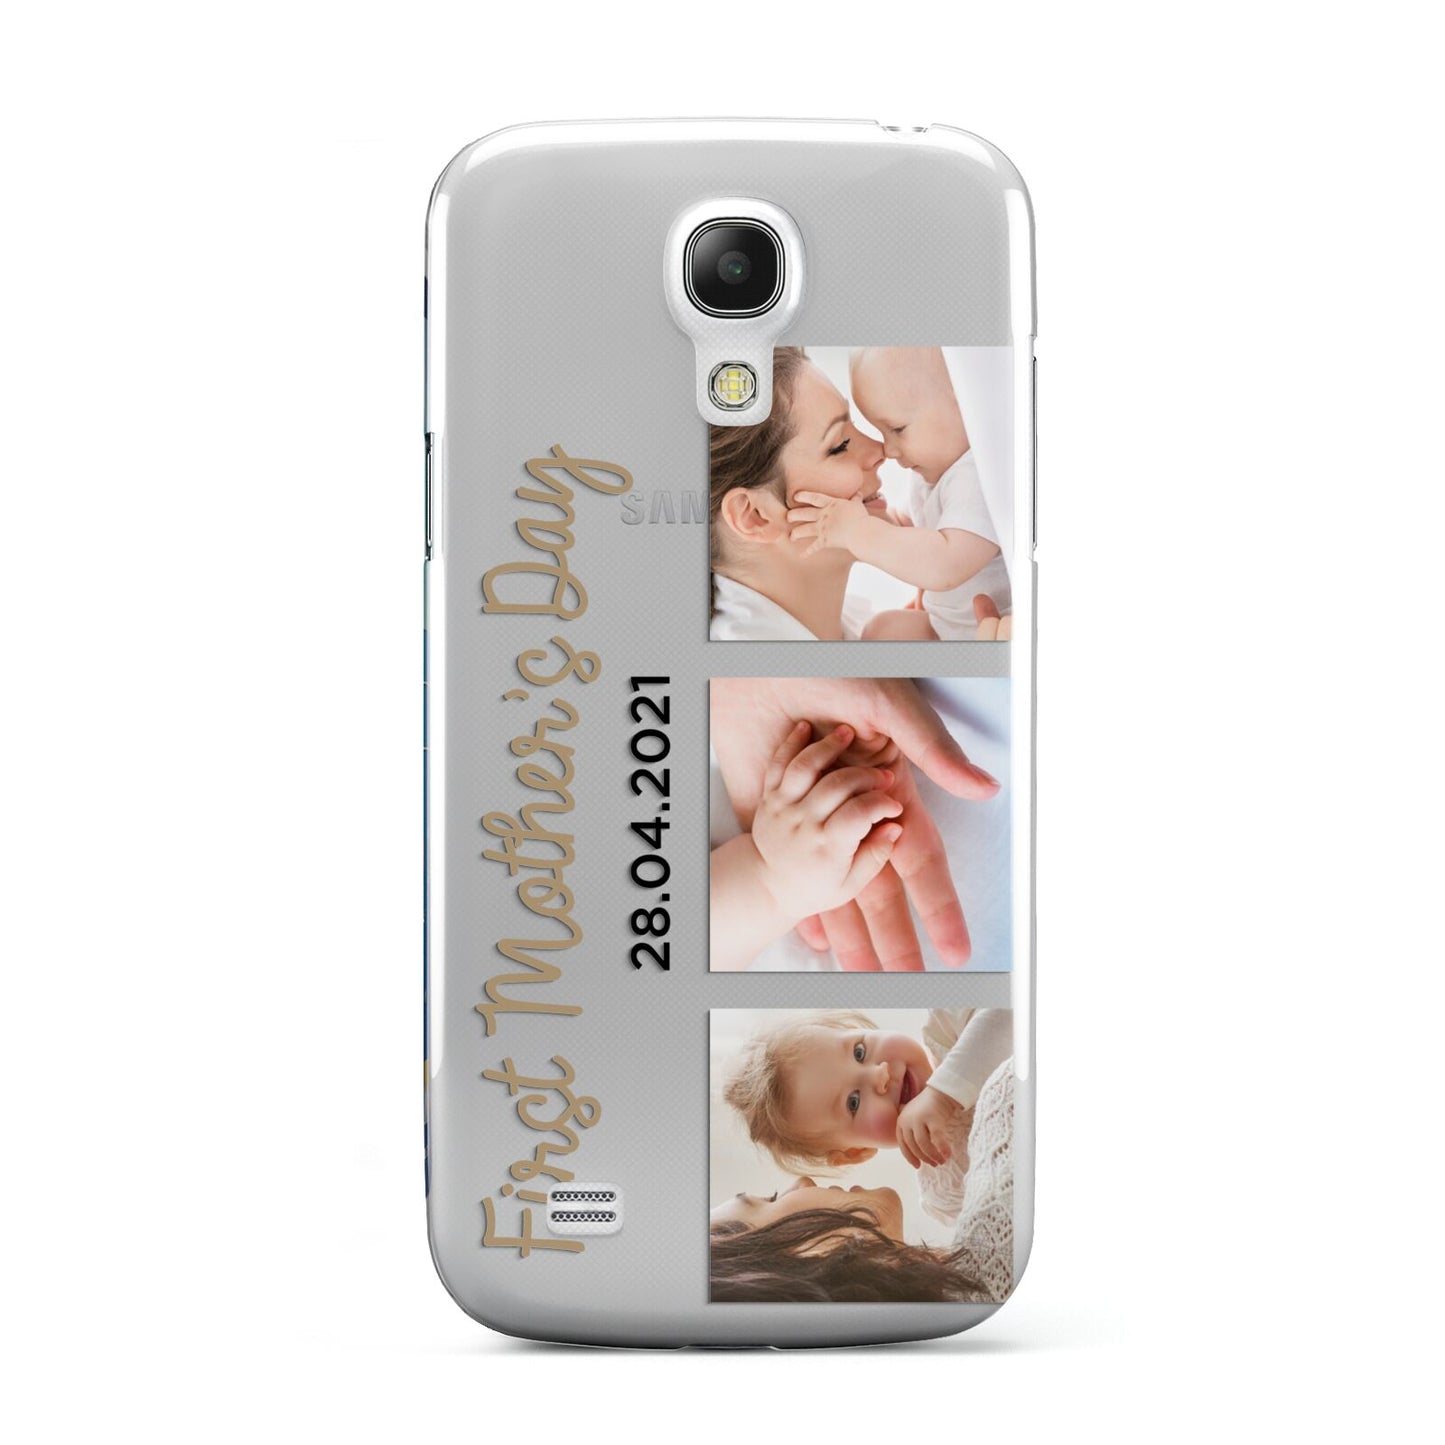 First Mothers Day Photo Samsung Galaxy S4 Mini Case